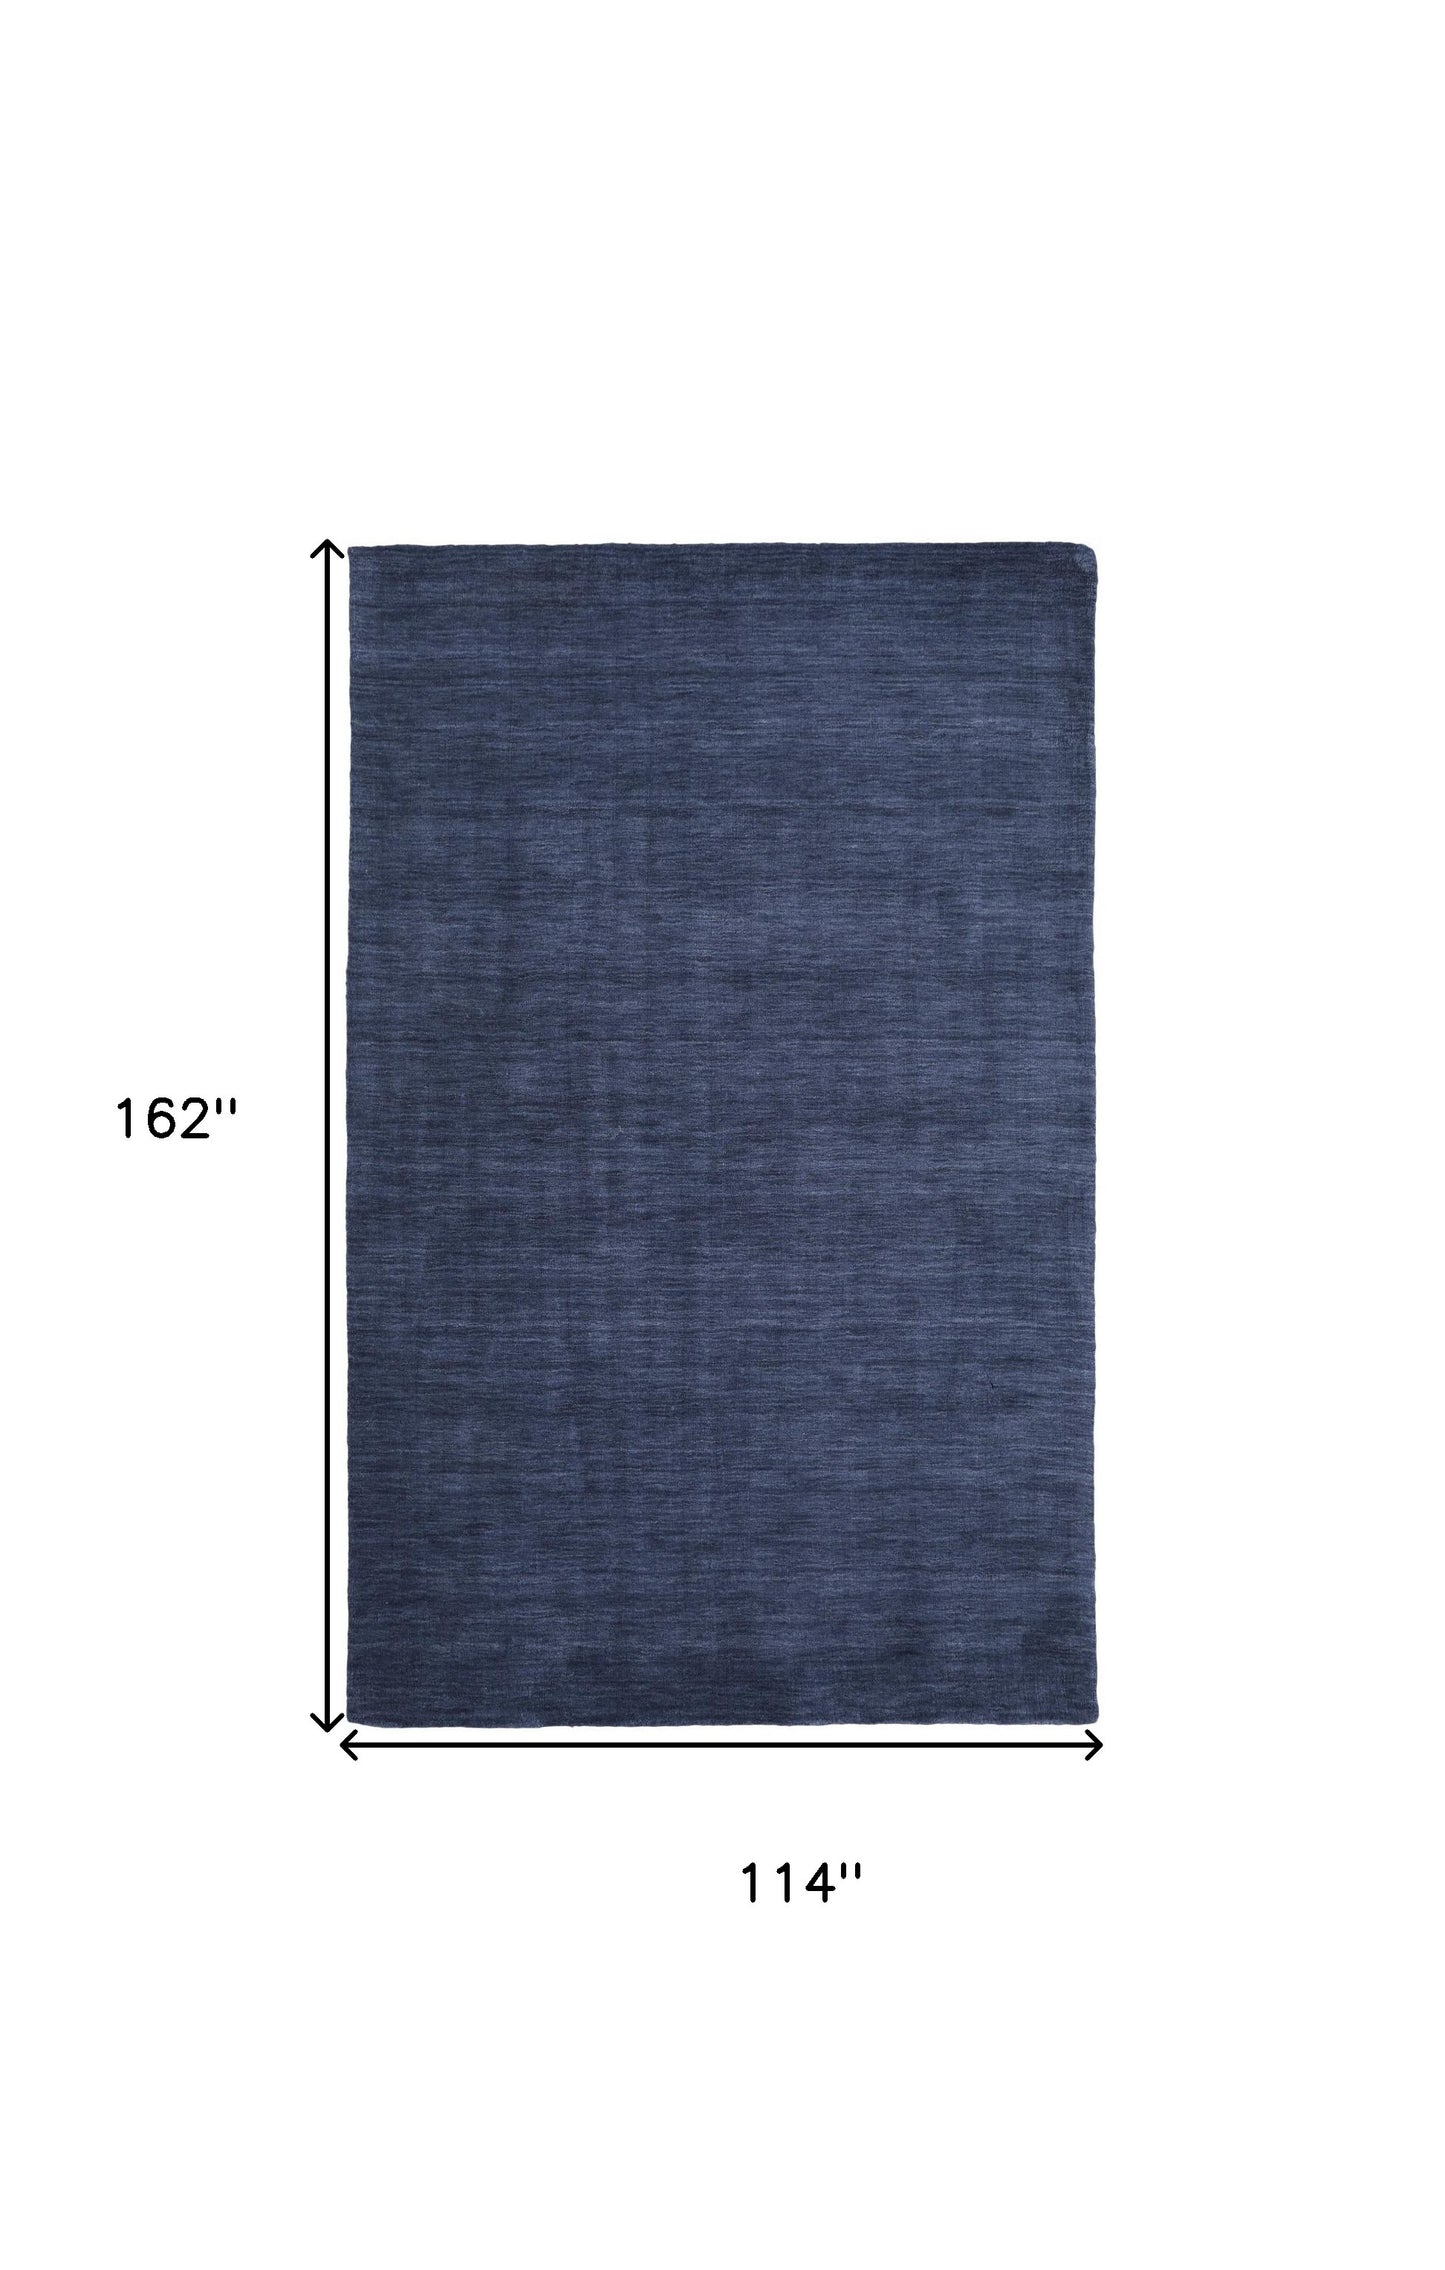 8' X 11' Blue Wool Hand Woven Stain Resistant Area Rug